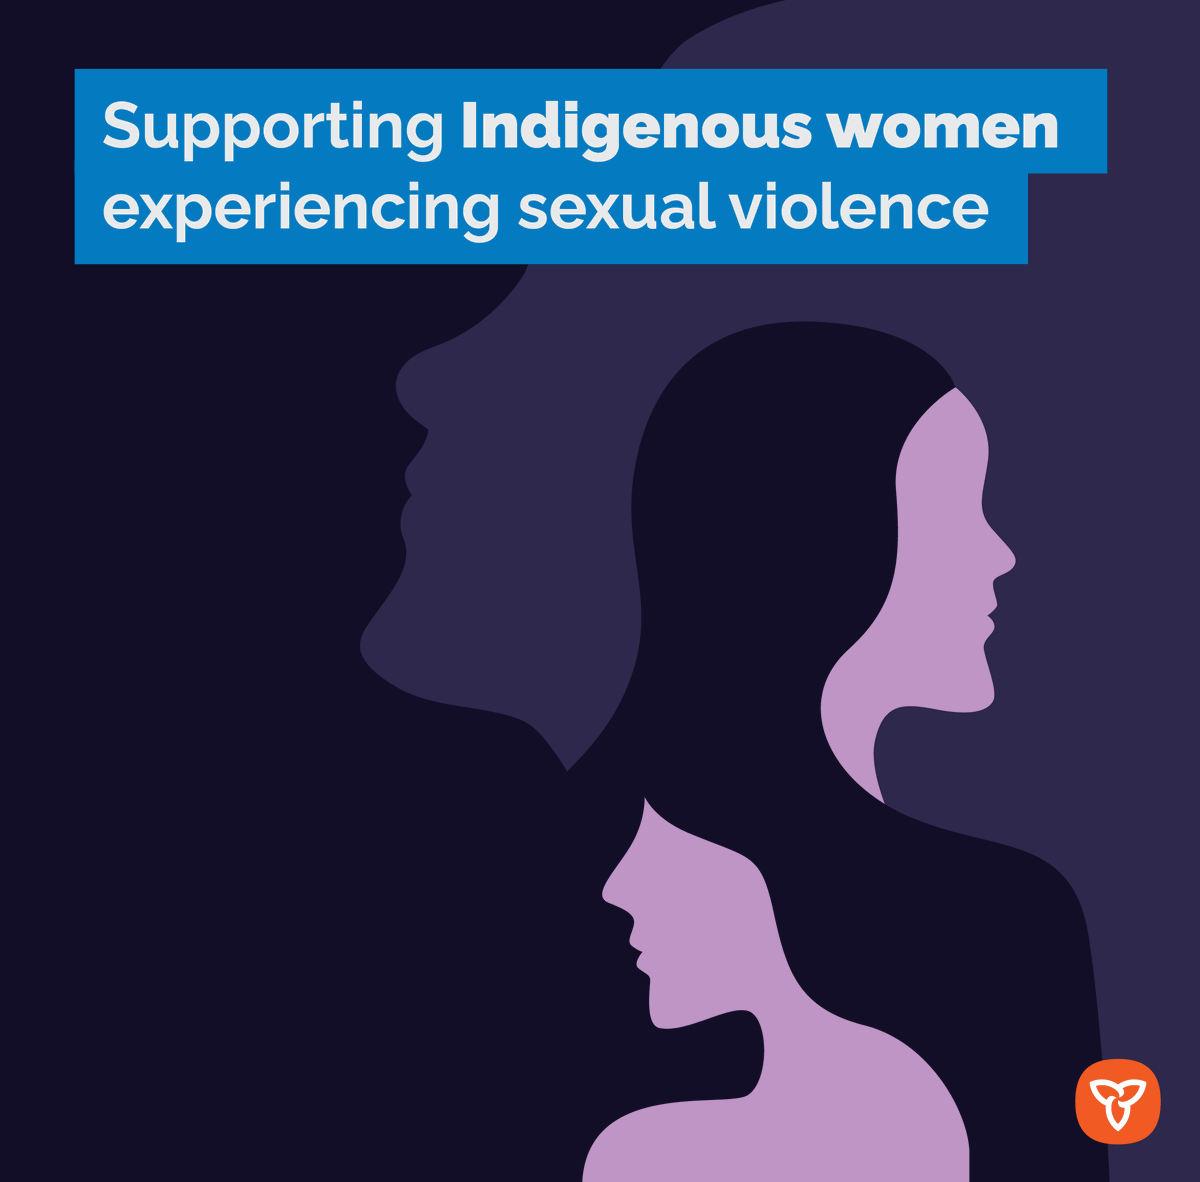 Indigenous women are more likely to have experienced sexual assault by age 15. Ontario provides support, prevention programs and shelters that address family violence and violence against Indigenous women and children. Learn more: ontario.ca/page/support-i…